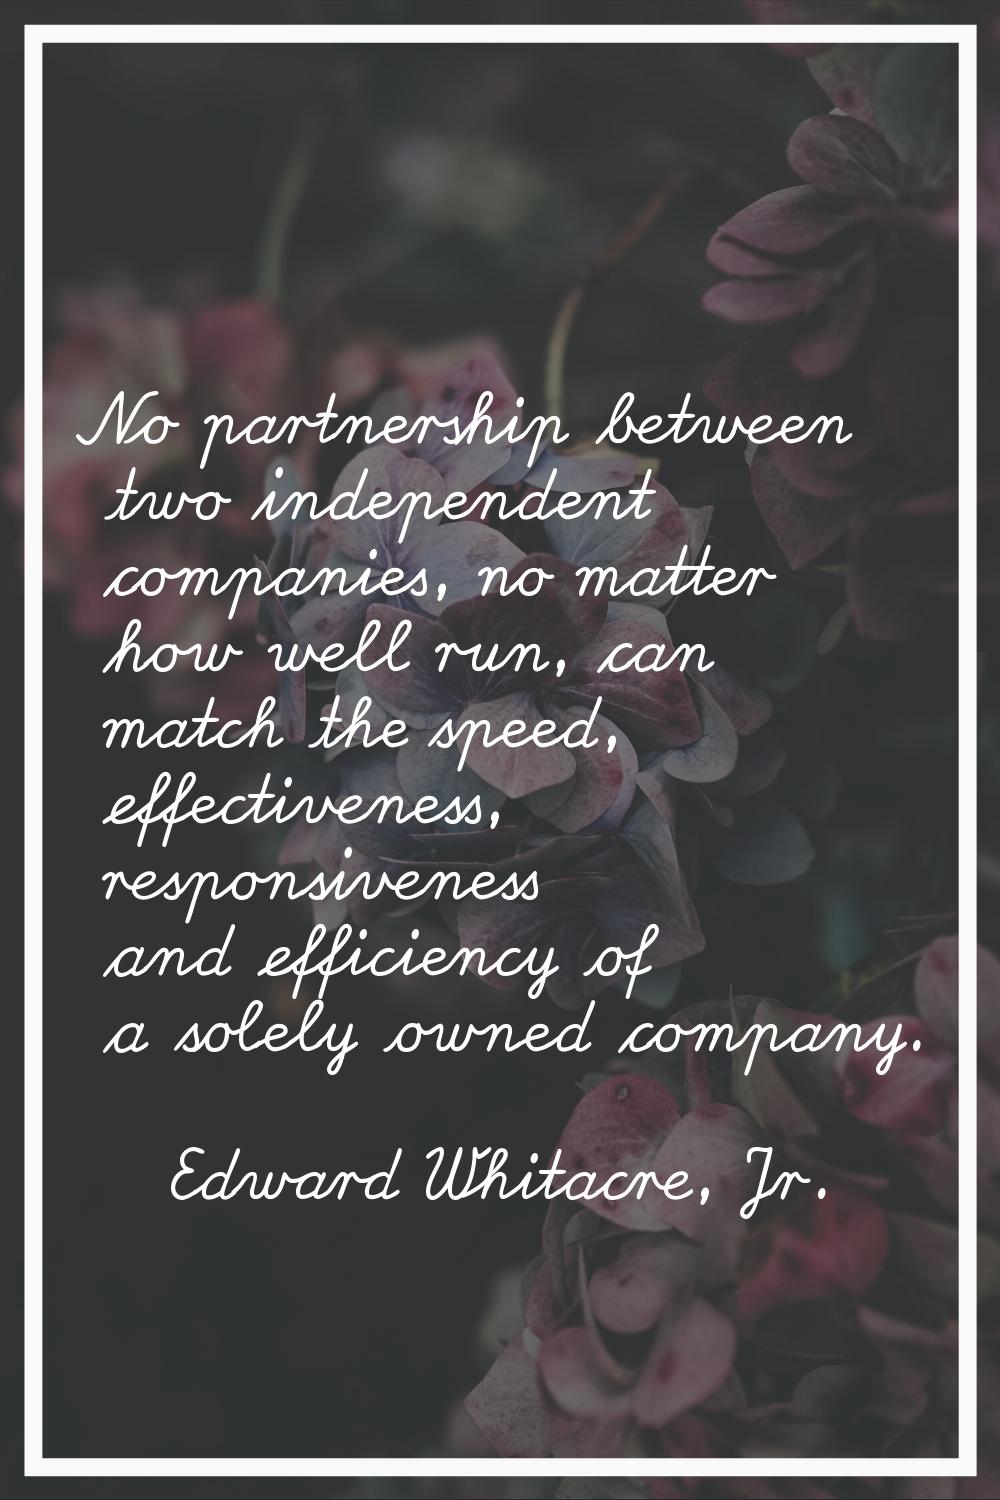 No partnership between two independent companies, no matter how well run, can match the speed, effe